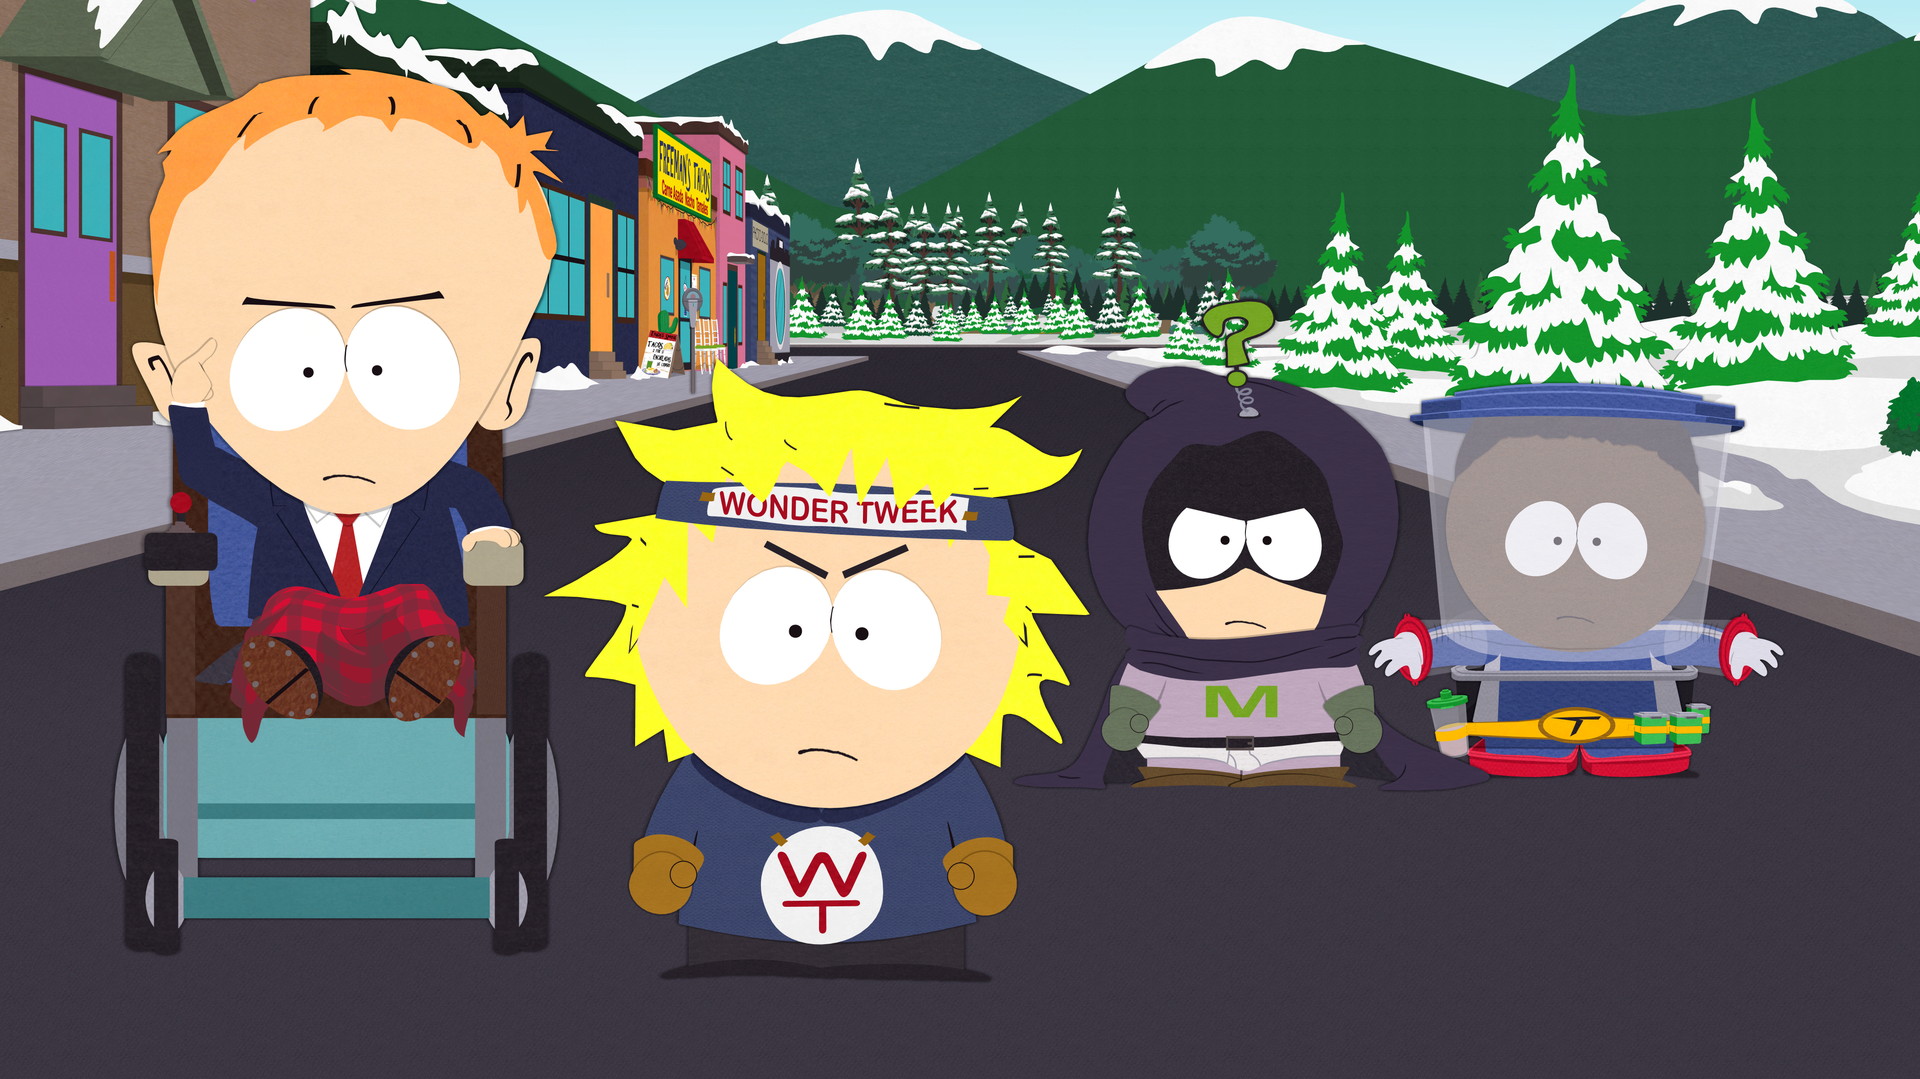 South Park: The Fractured but Whole - screenshot 3